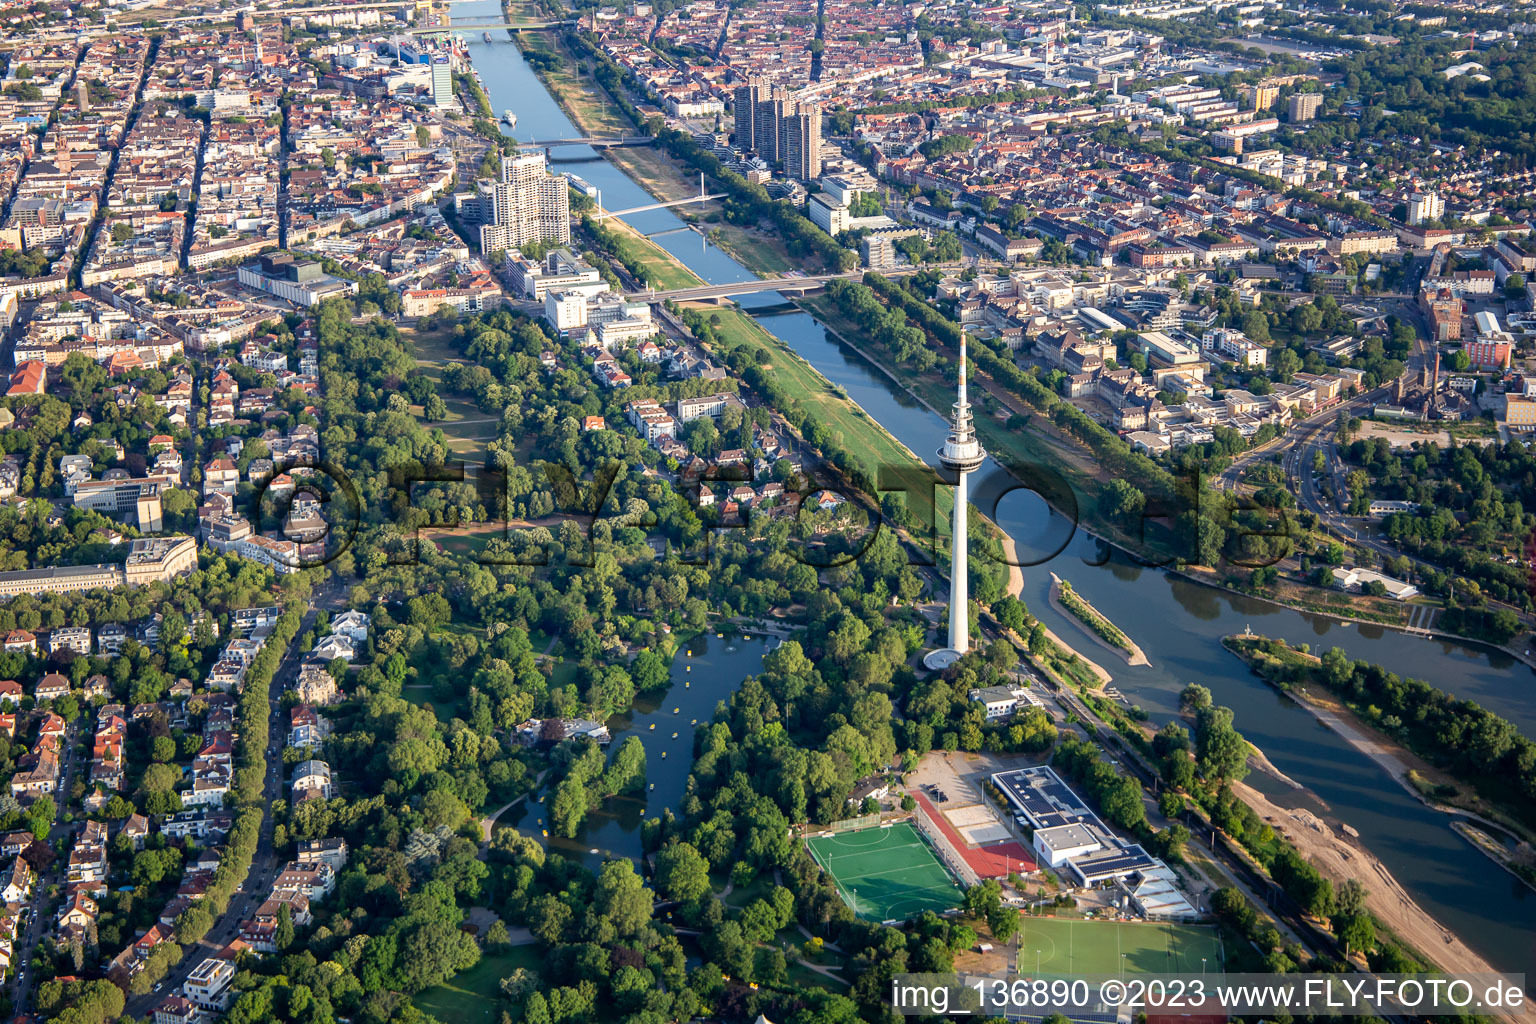 Telecommunications tower and Kutzerweiher in Luisenpark on the banks of the Neckar in the district Oststadt in Mannheim in the state Baden-Wuerttemberg, Germany